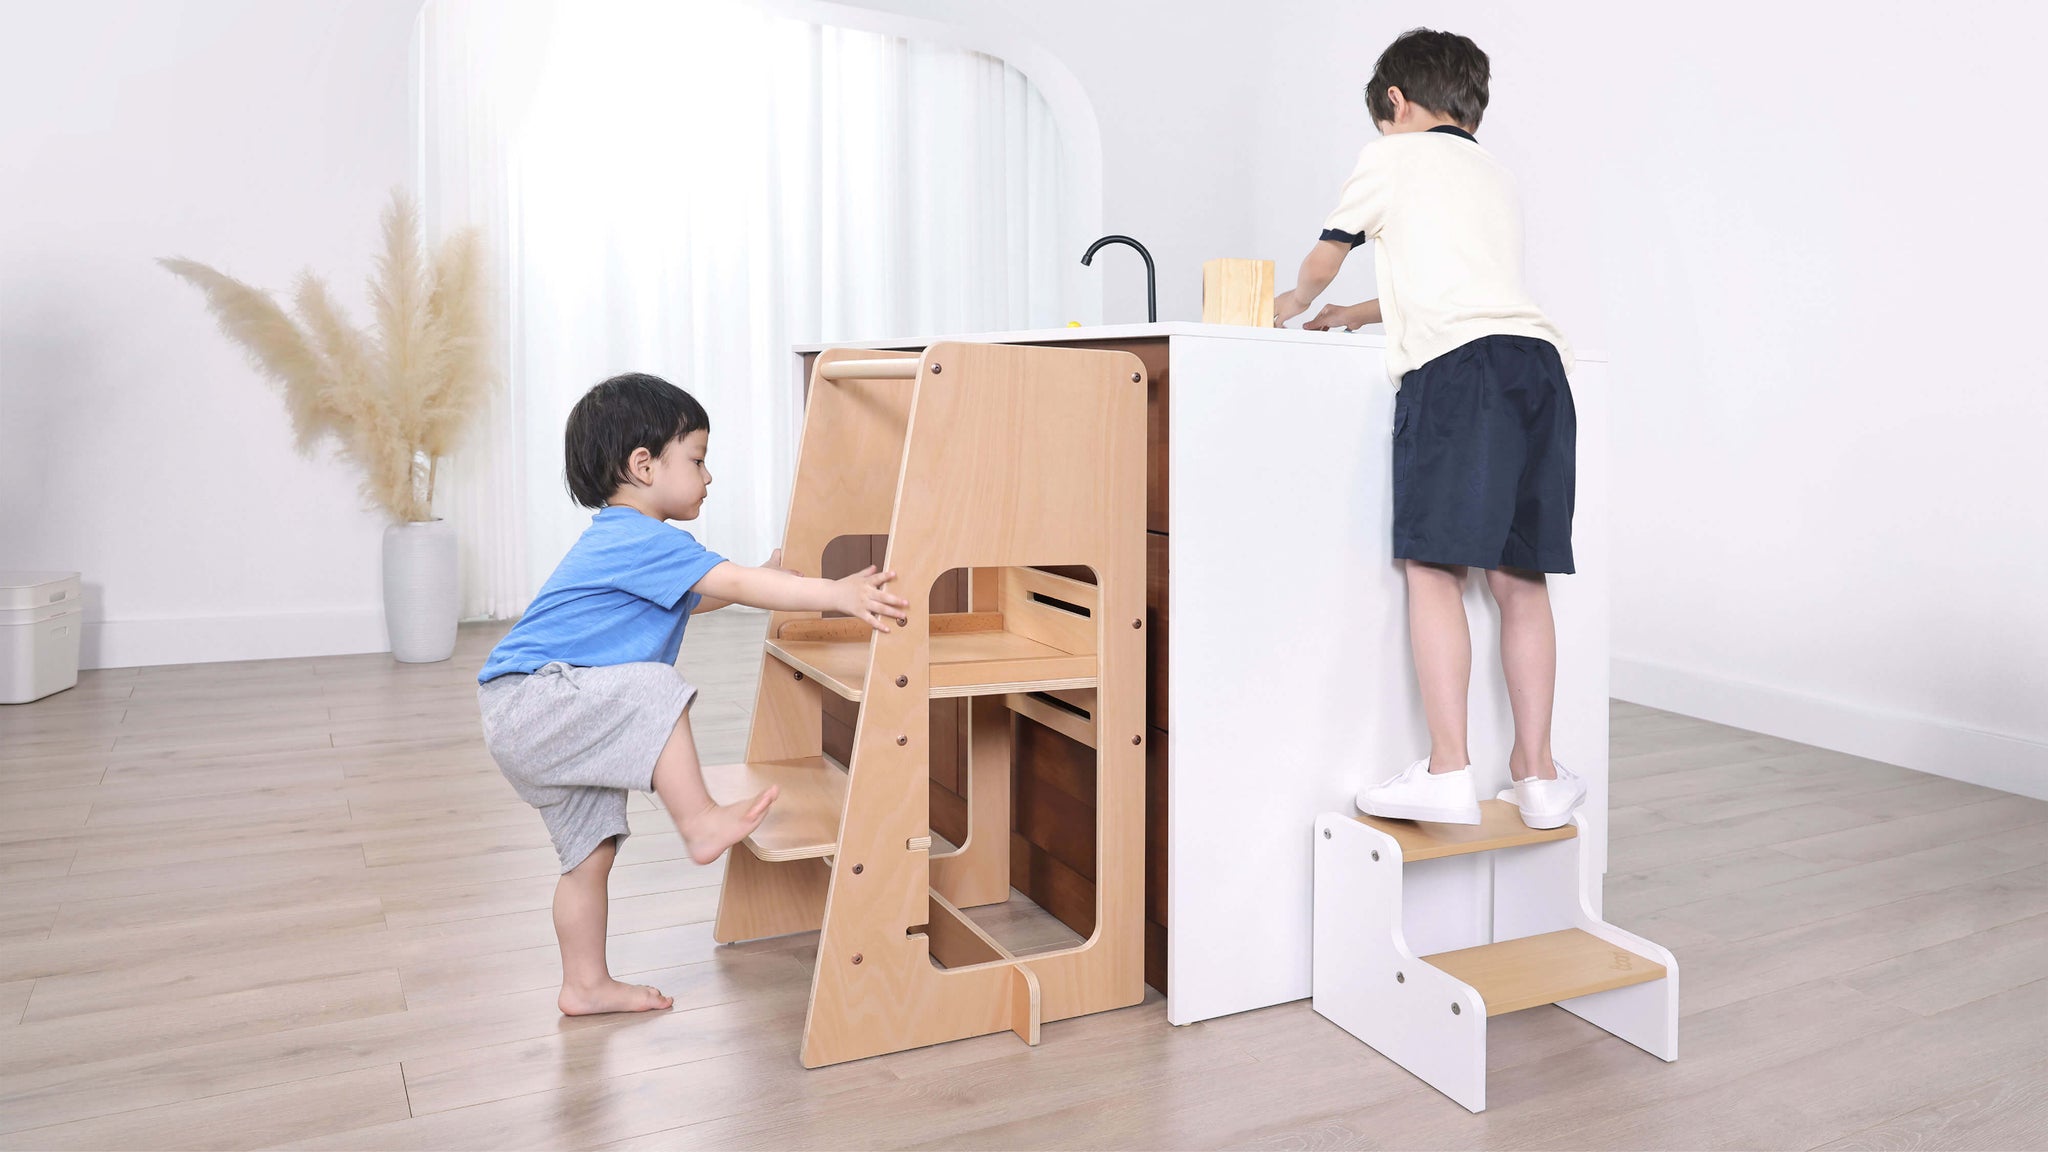 Child climbing learning tower